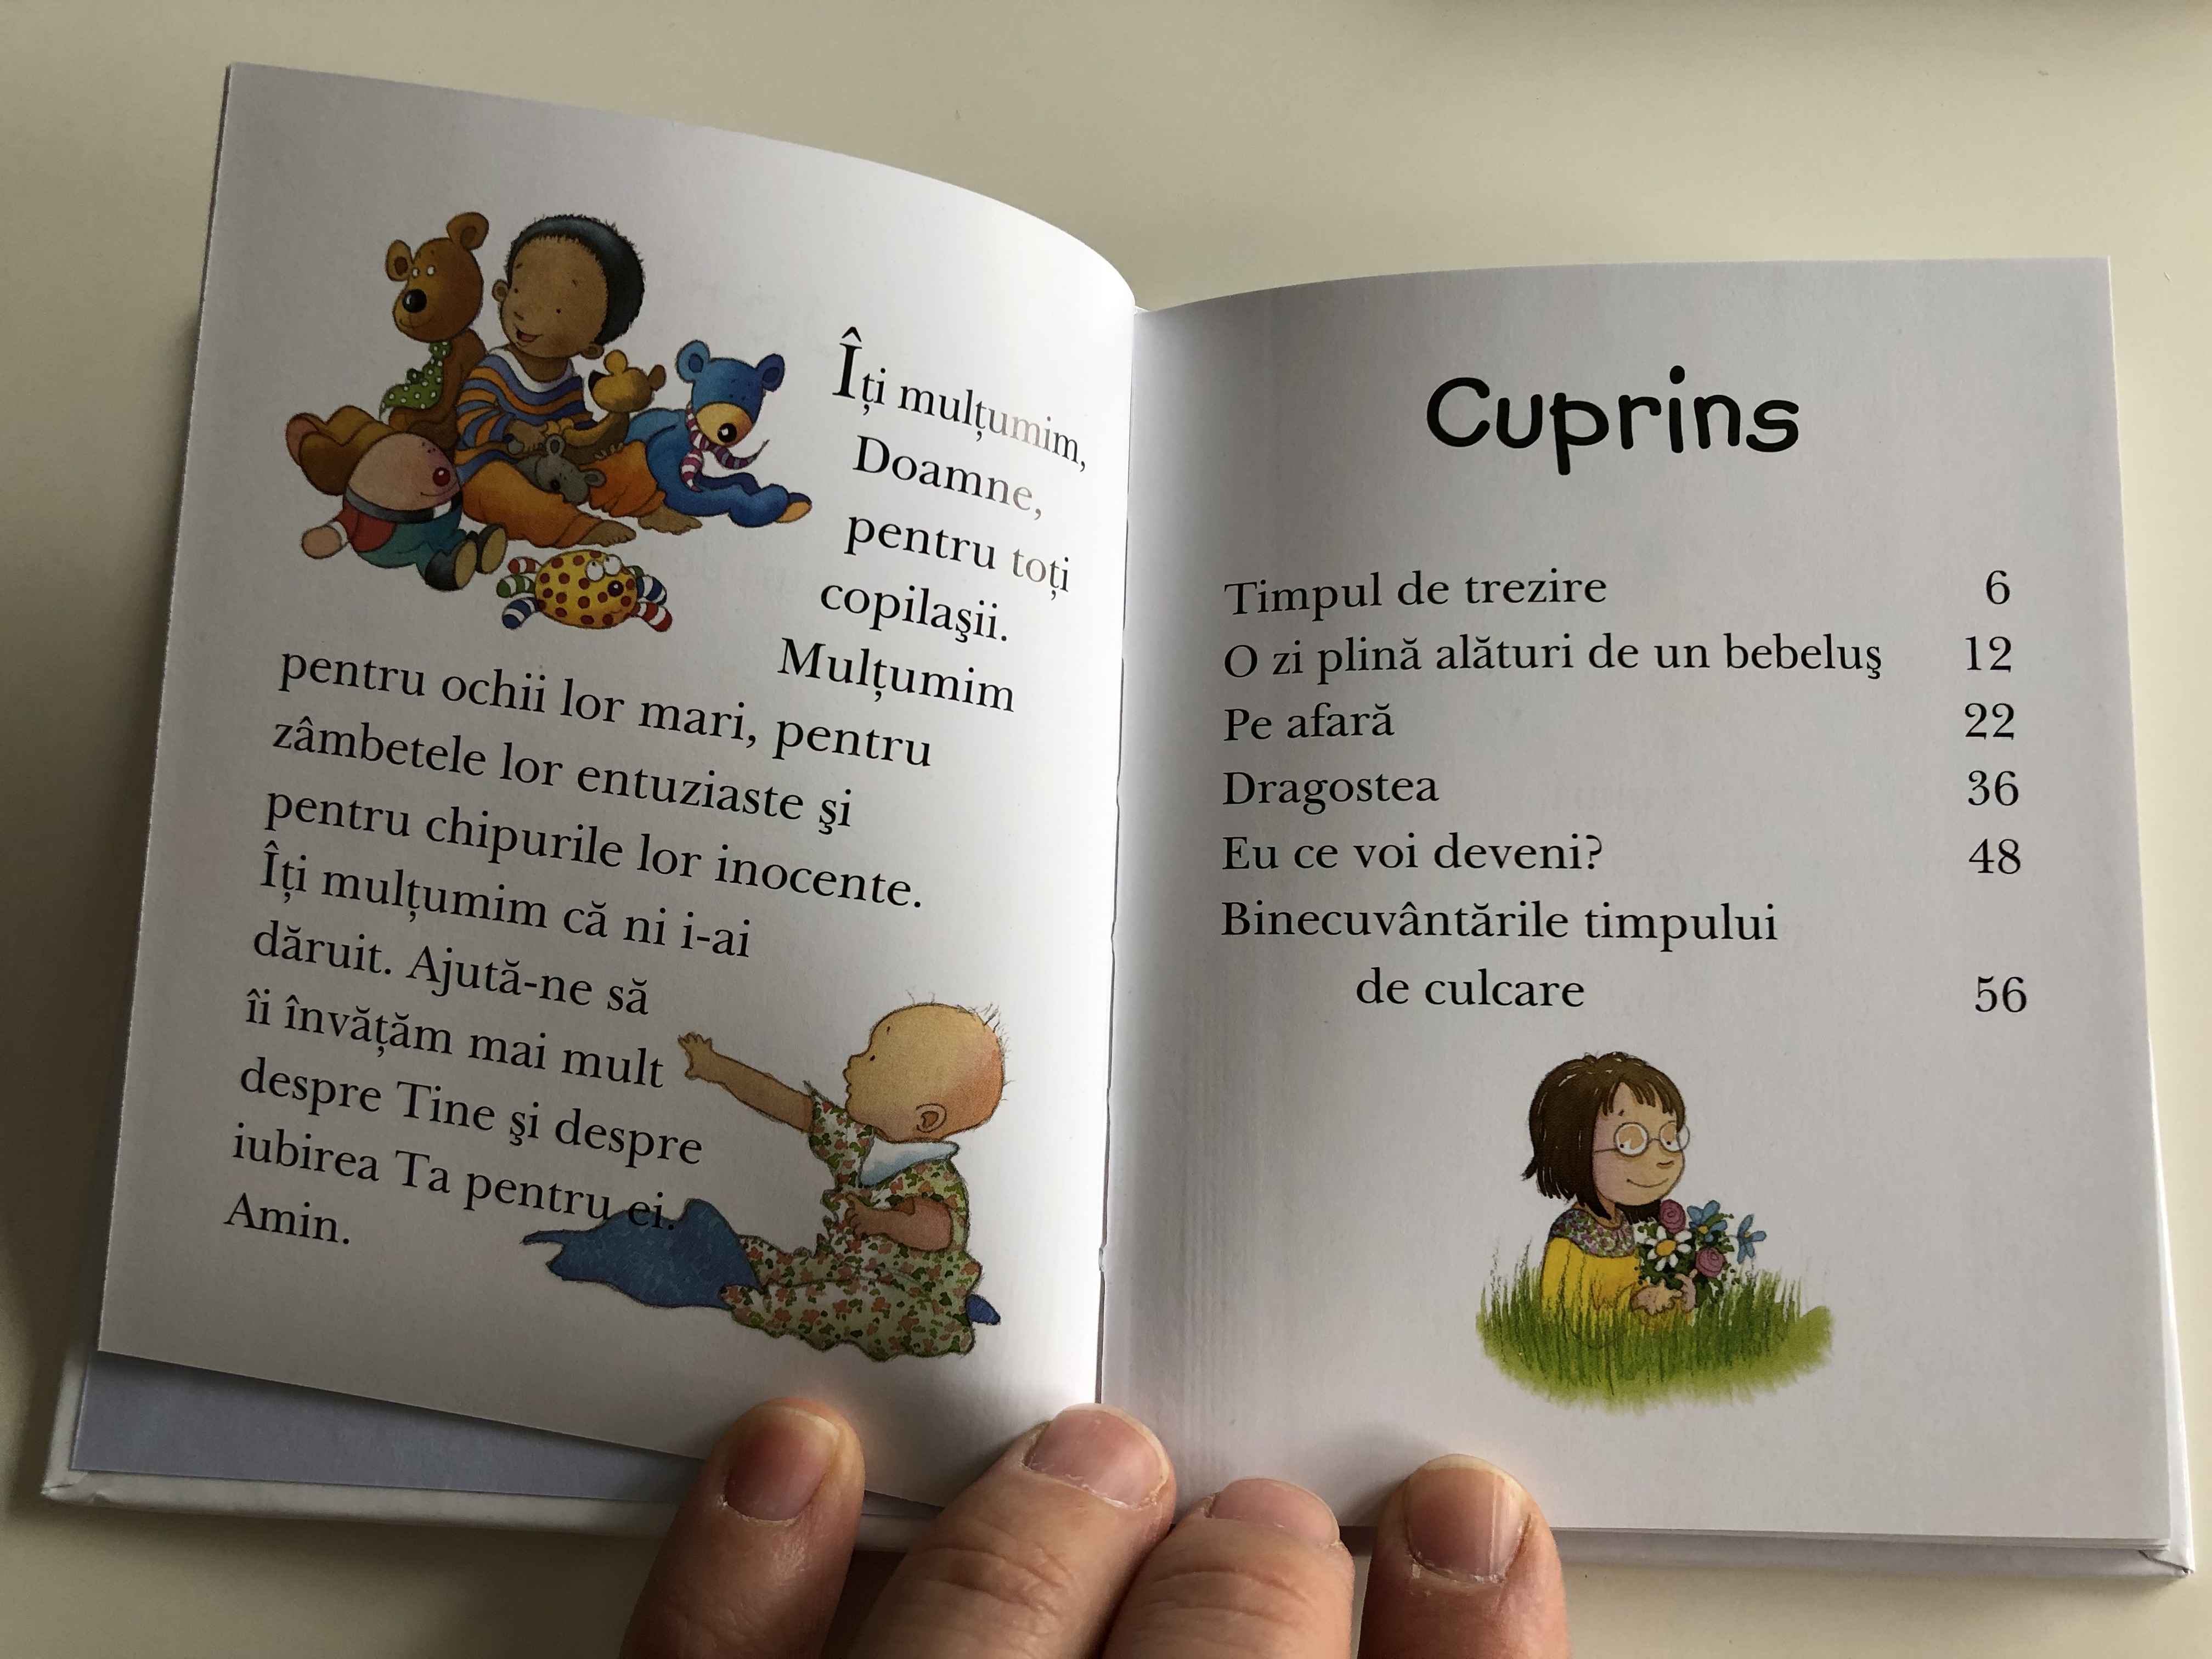 biblia-rug-ciuni-pentru-cei-micuti-by-sarag-toulmin-romanian-translation-of-baby-bible-and-baby-prayers-lion-hudson-comes-in-a-protective-box-baby-bible-for-children-between-1-3-years-illustrations-by-kristina-step-4915236-.jpg